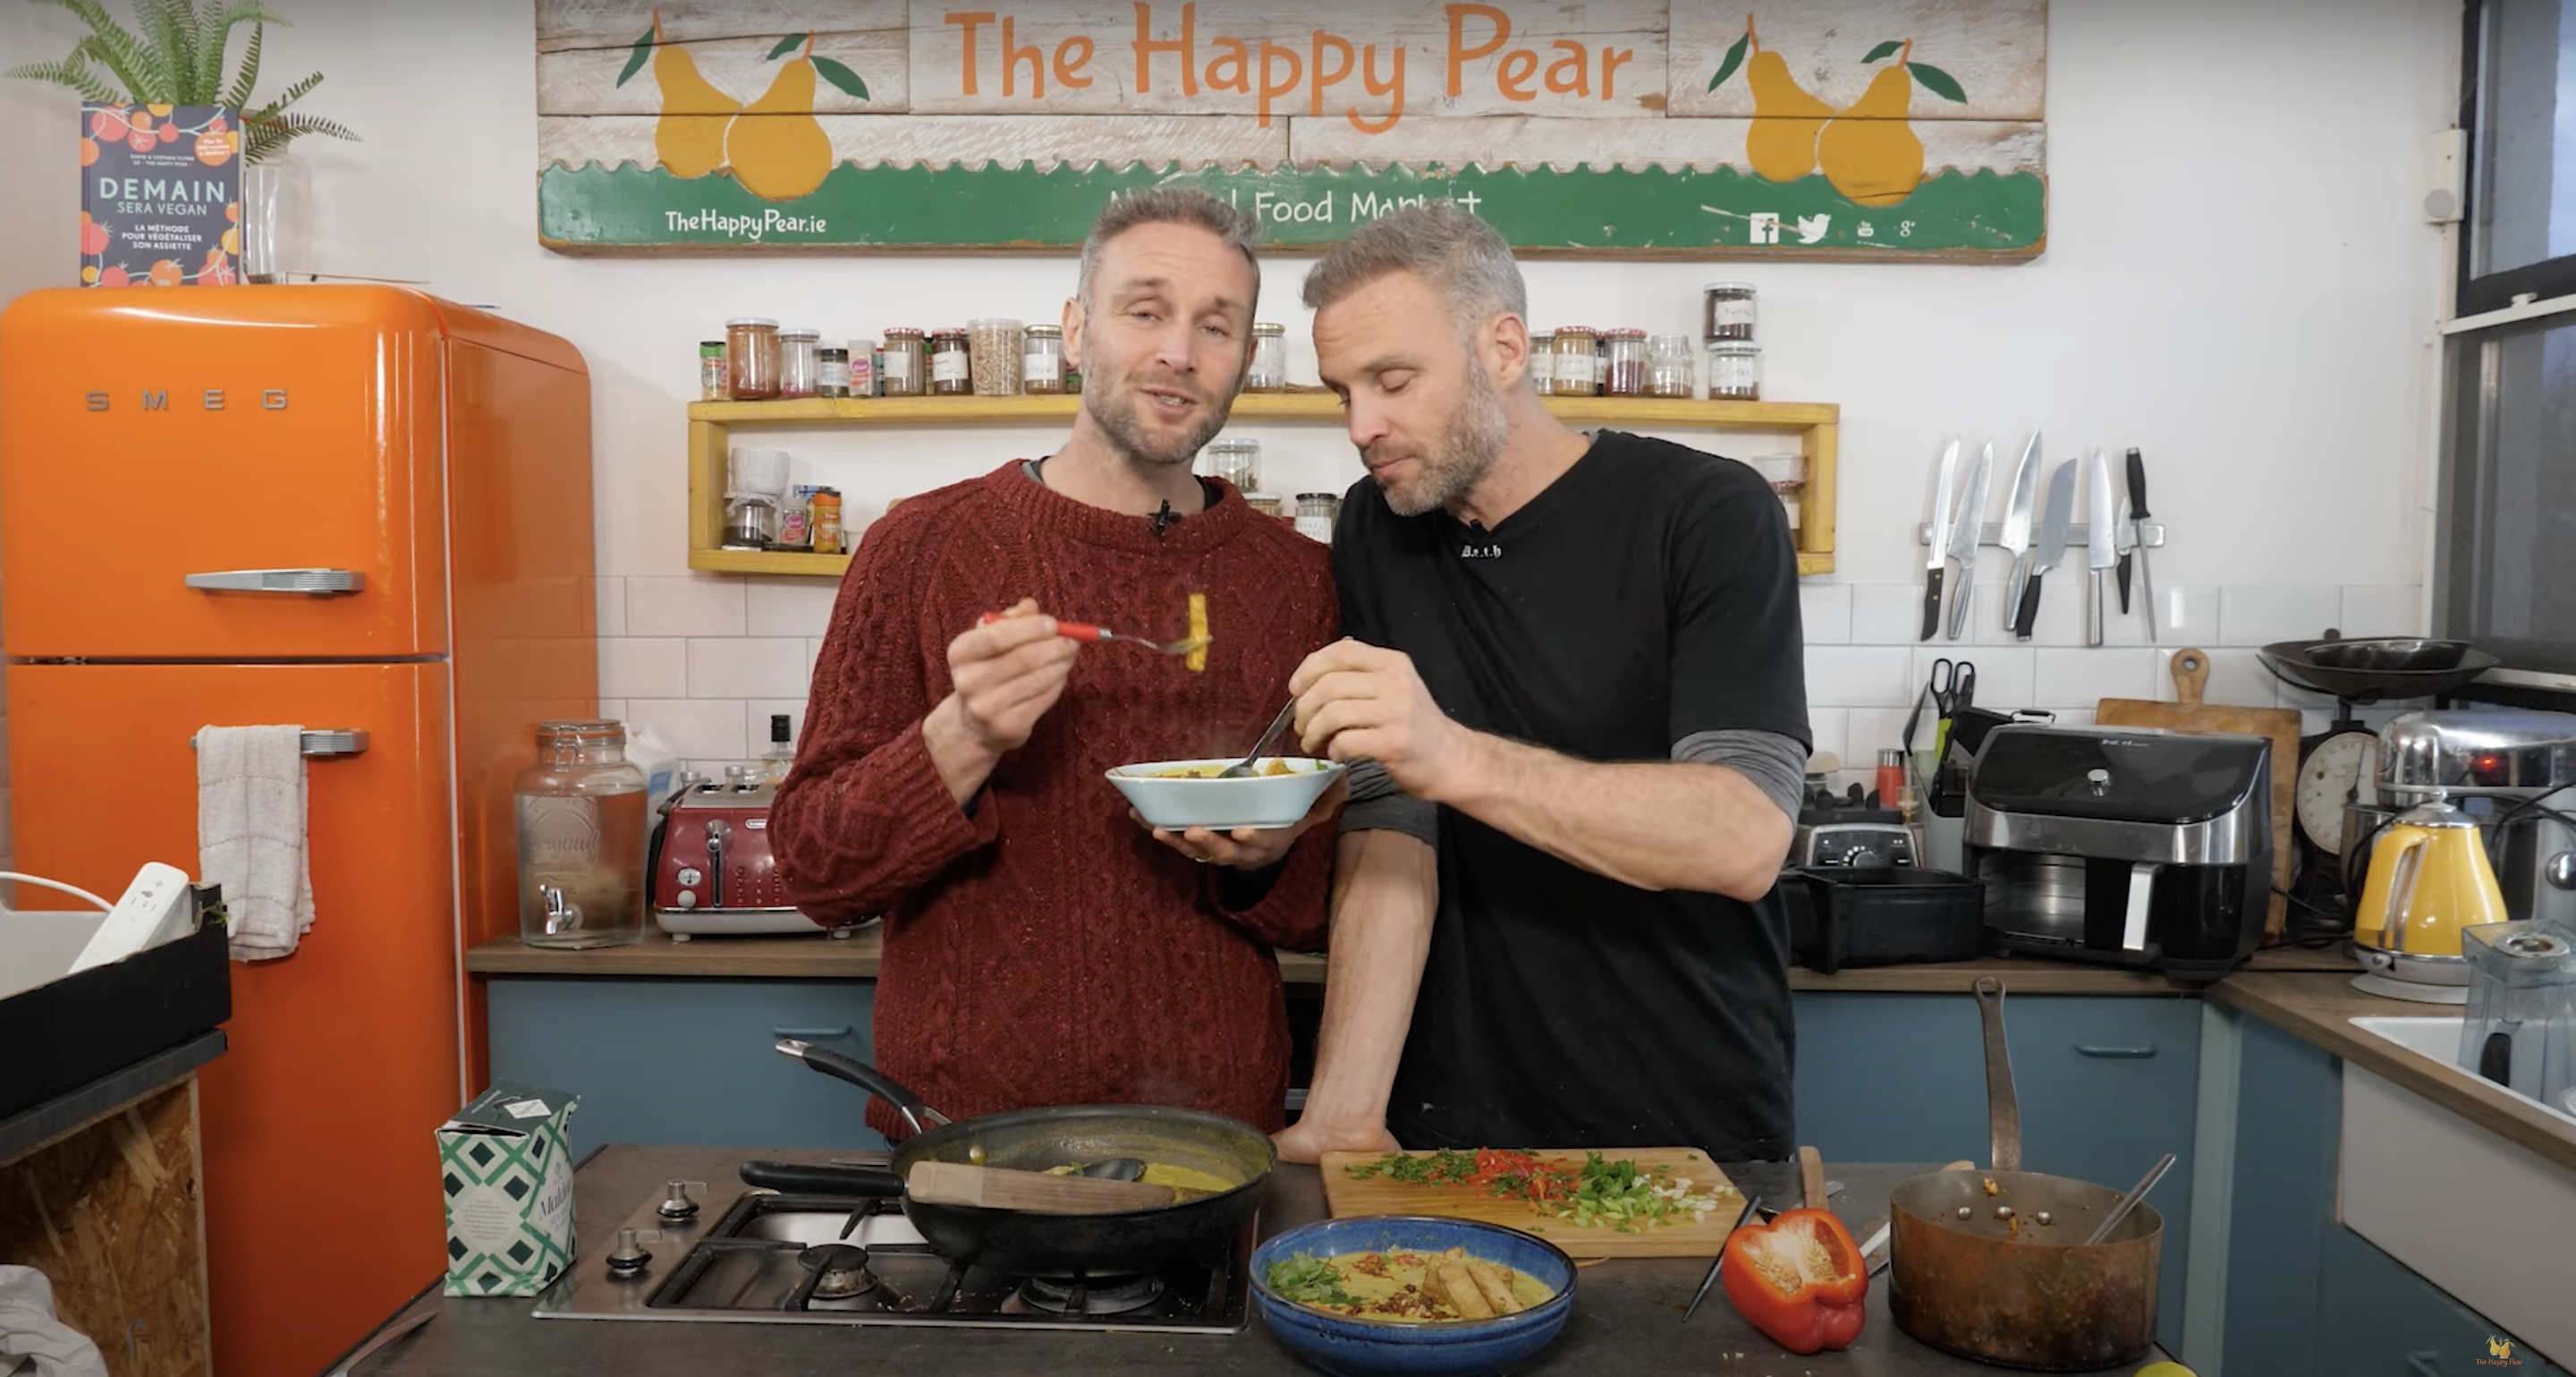 Image of David and Stephen Flynn, co-hosts of The Happy Pear, from YouTube video "EASY VEGAN THAI NOODLE SOUP with an EPIC PEANUT RAYU"